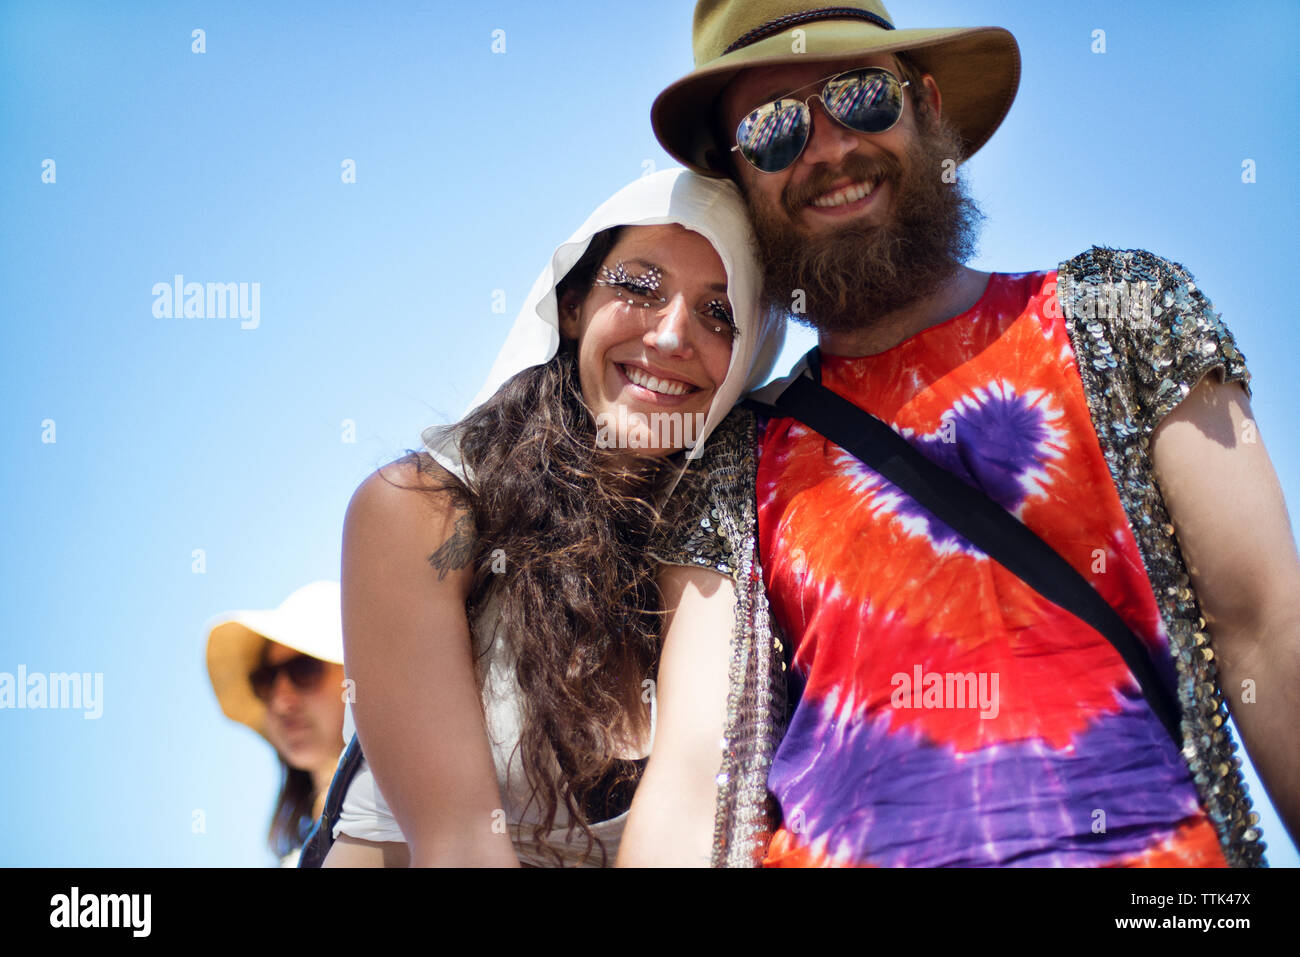 Low angle view of cheerful man and woman standing against clear sky at traditional event Stock Photo